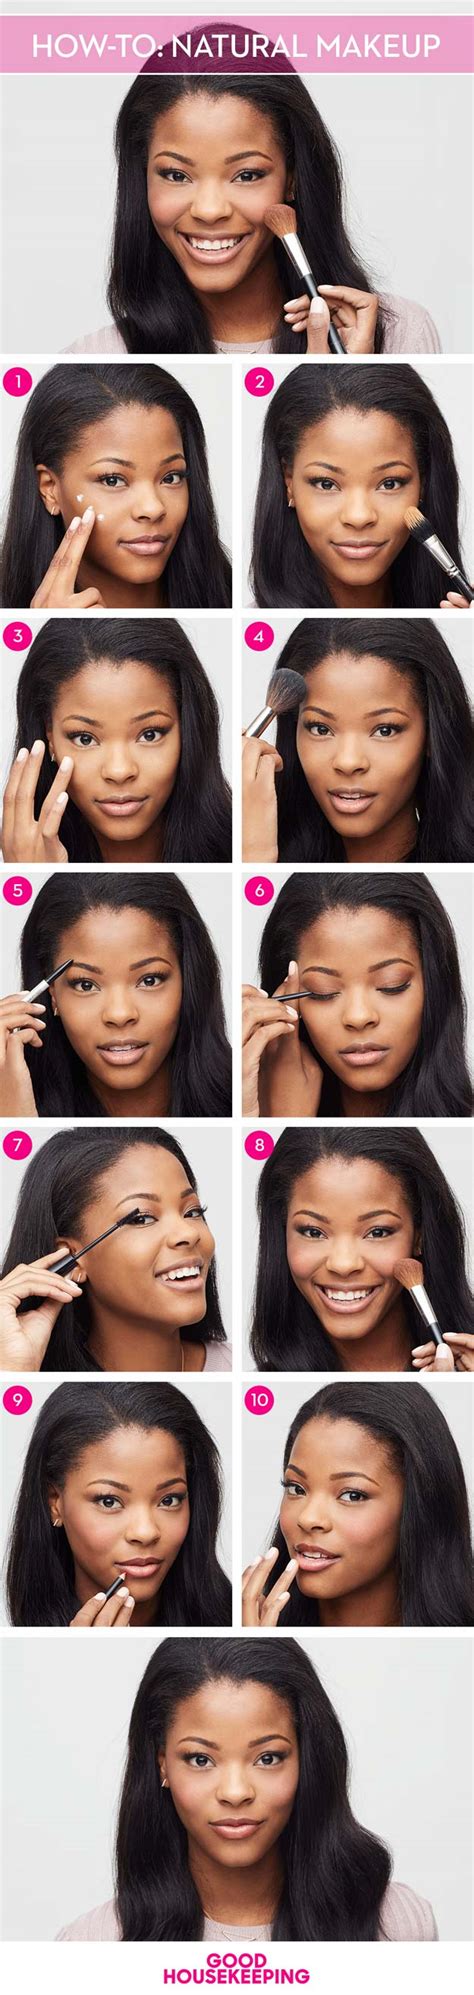 24 cool makeup tutorials for teens diy projects for teens